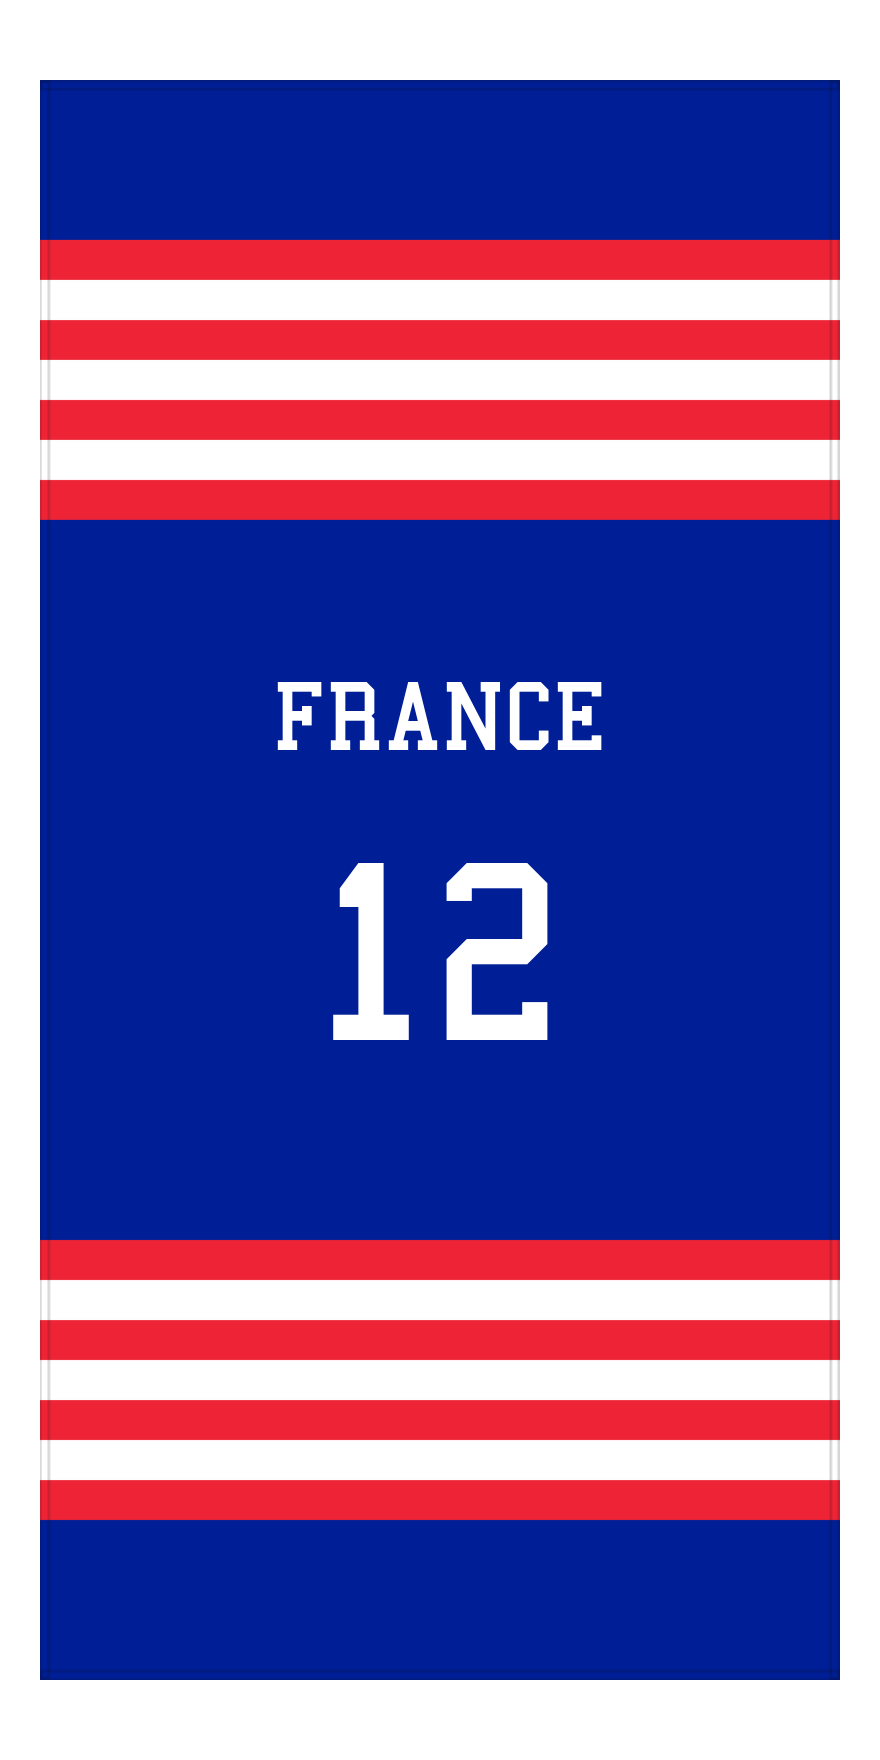 Personalized Jersey Number 3-on-1 Stripes Sports Beach Towel - France - Vertical Design - Front View